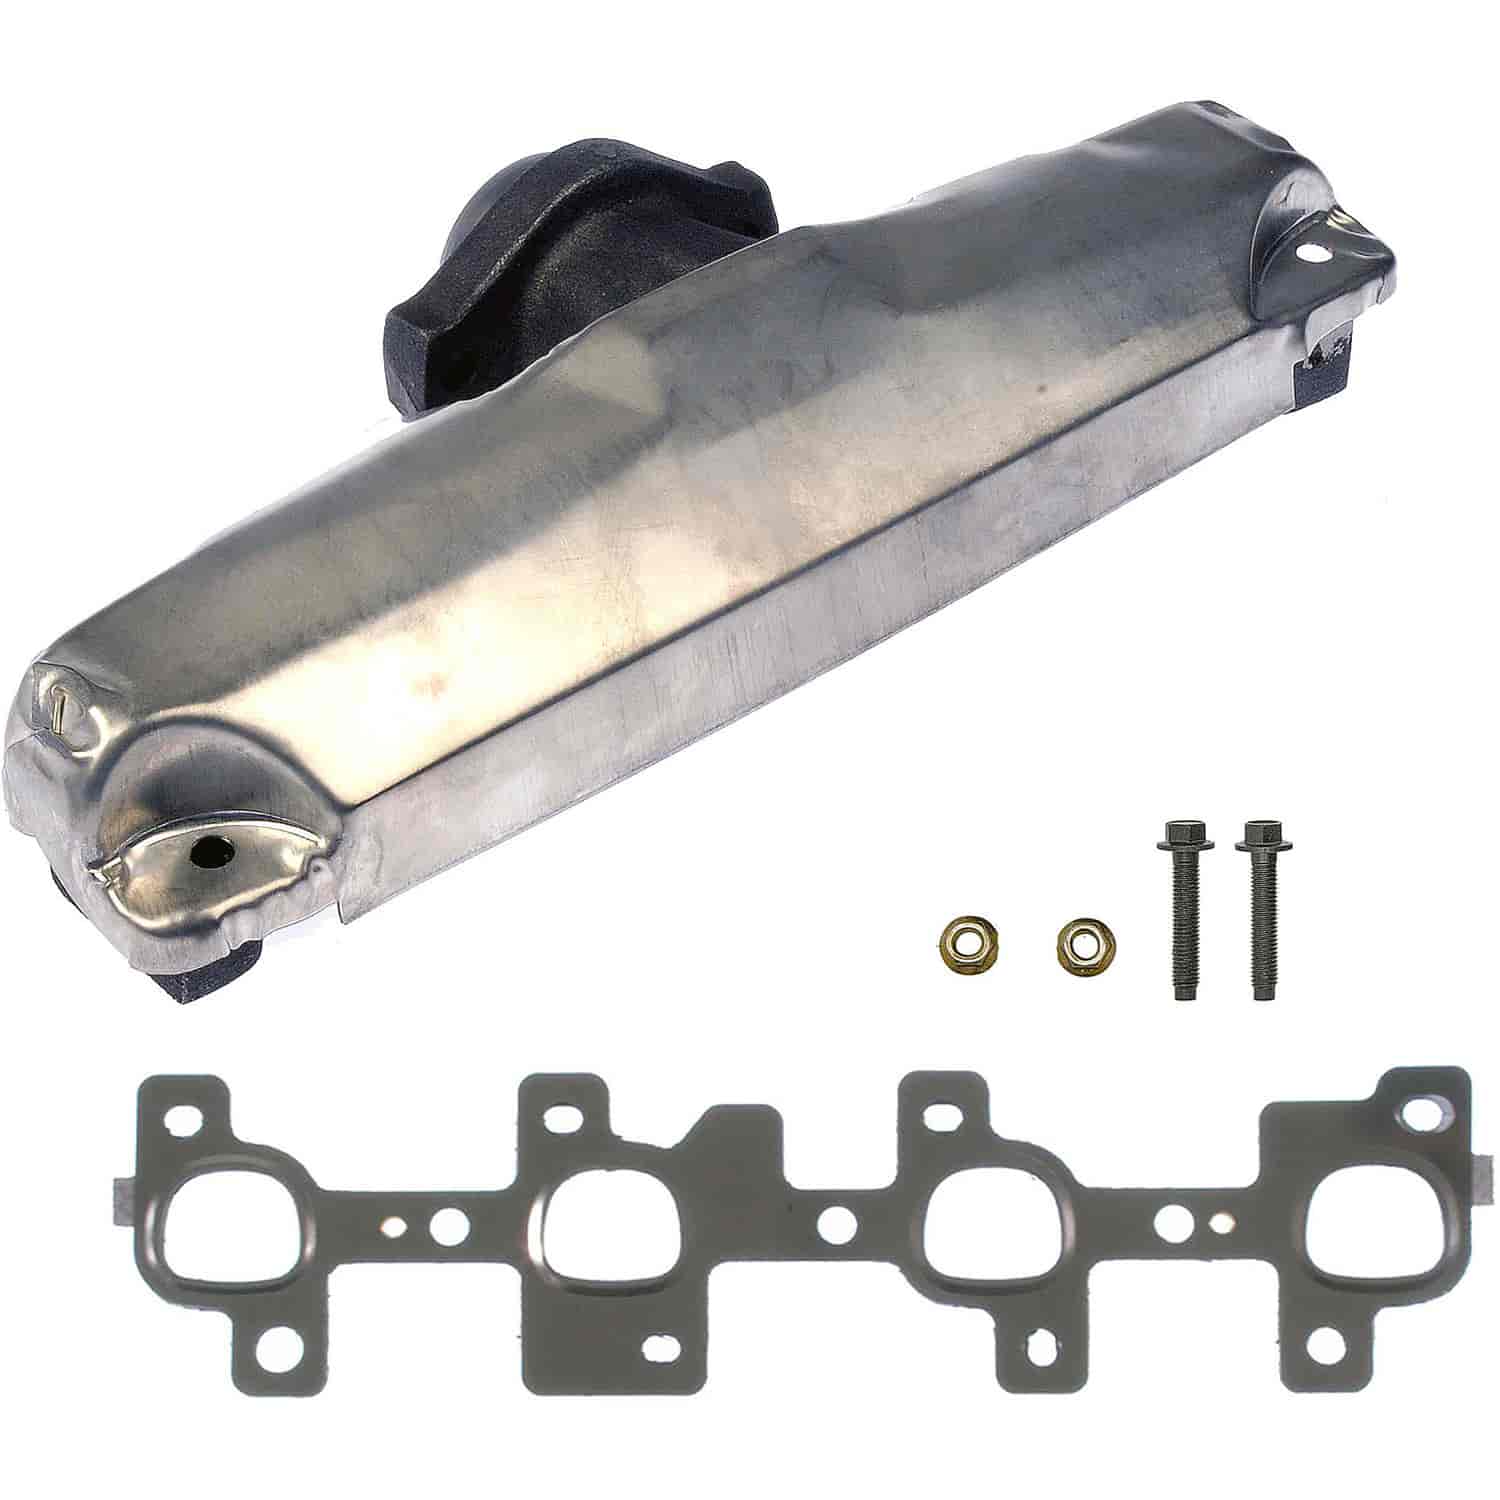 Cast Iron Exhaust Manifold - Includes Gaskets and Hardware